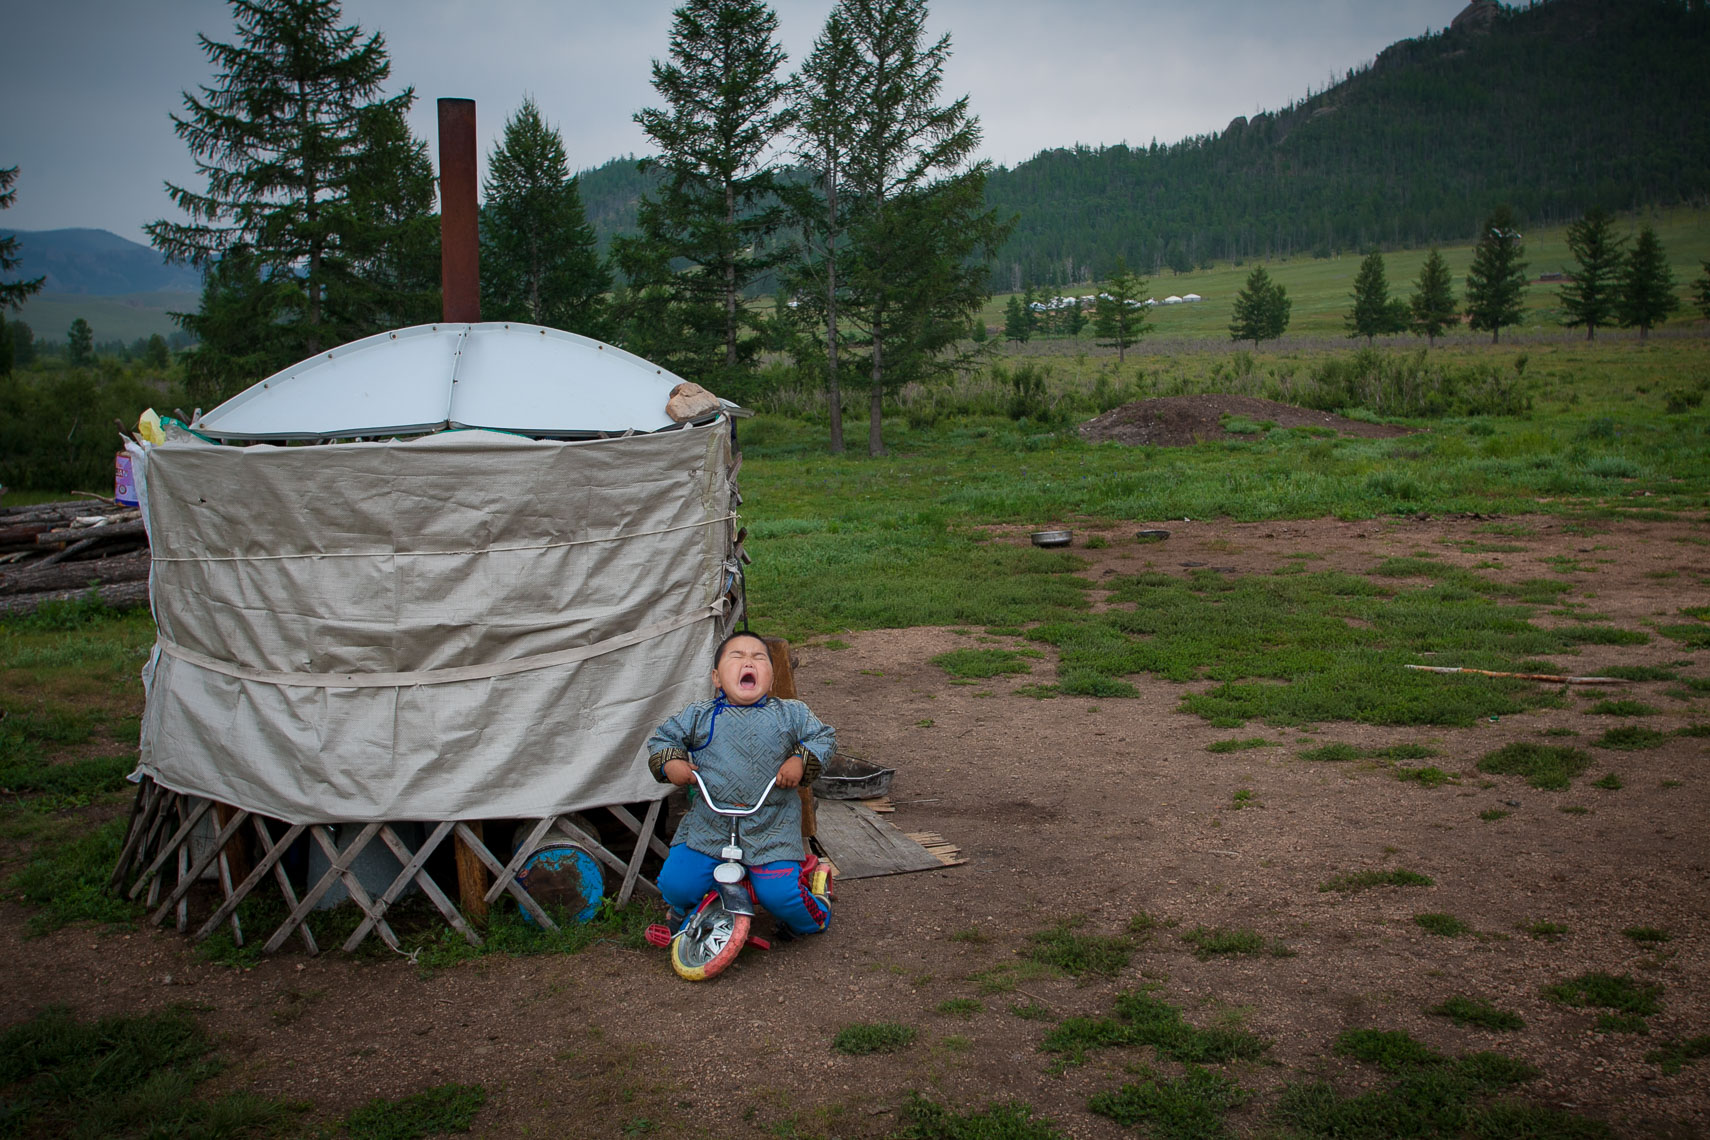 Advanced_Photo_Workshop_Mongolia_for_Rustic_Pathways_20130805_photo_by_Justin_Kase_Conder_1558